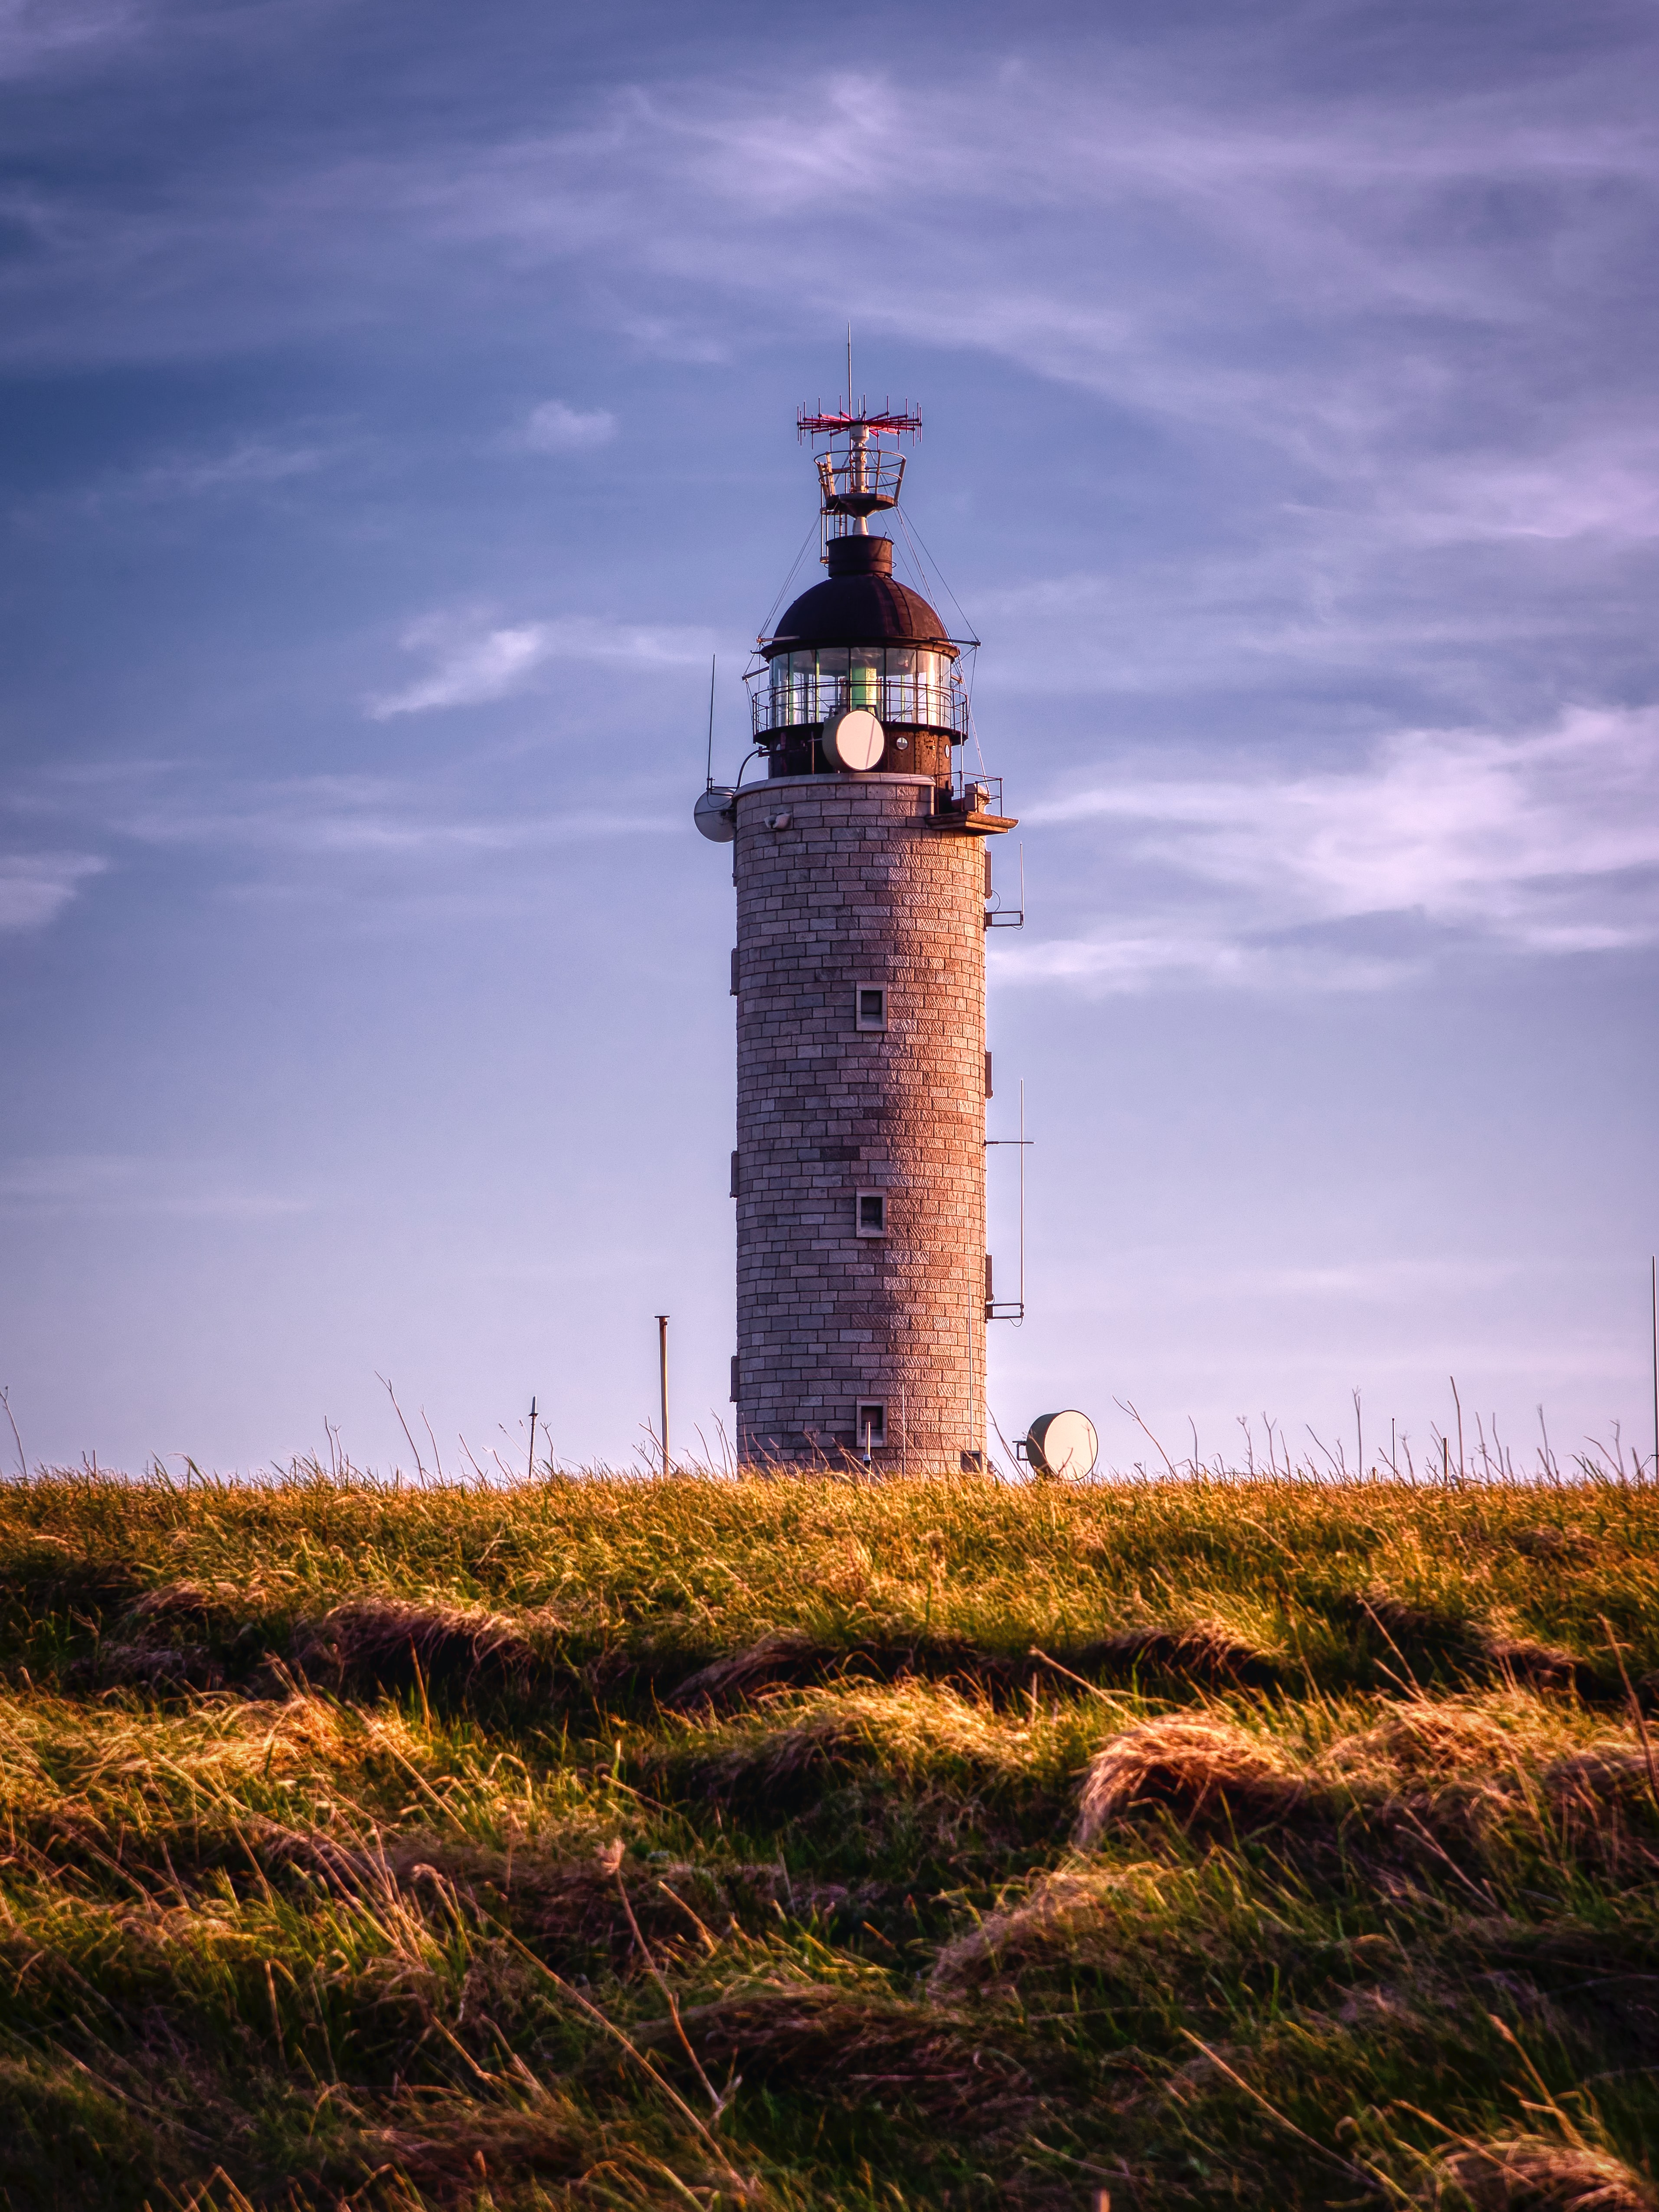 android miscellanea, grass, building, miscellaneous, lighthouse, tower